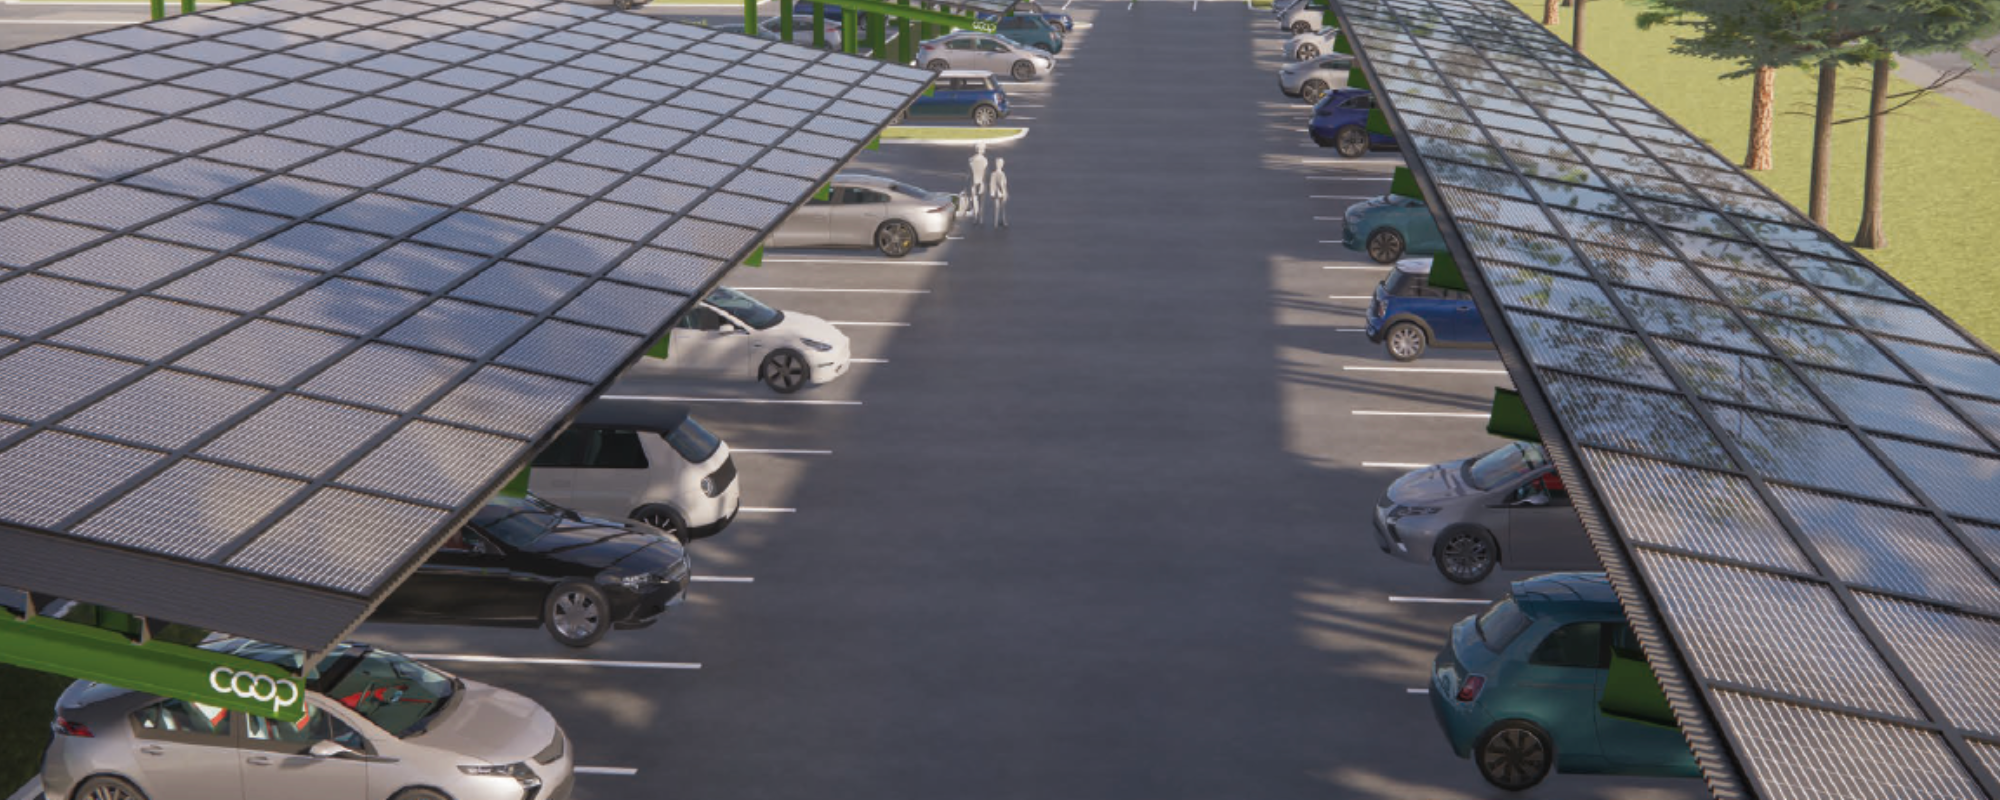 Commercial solar carports: why should businesses consider them?